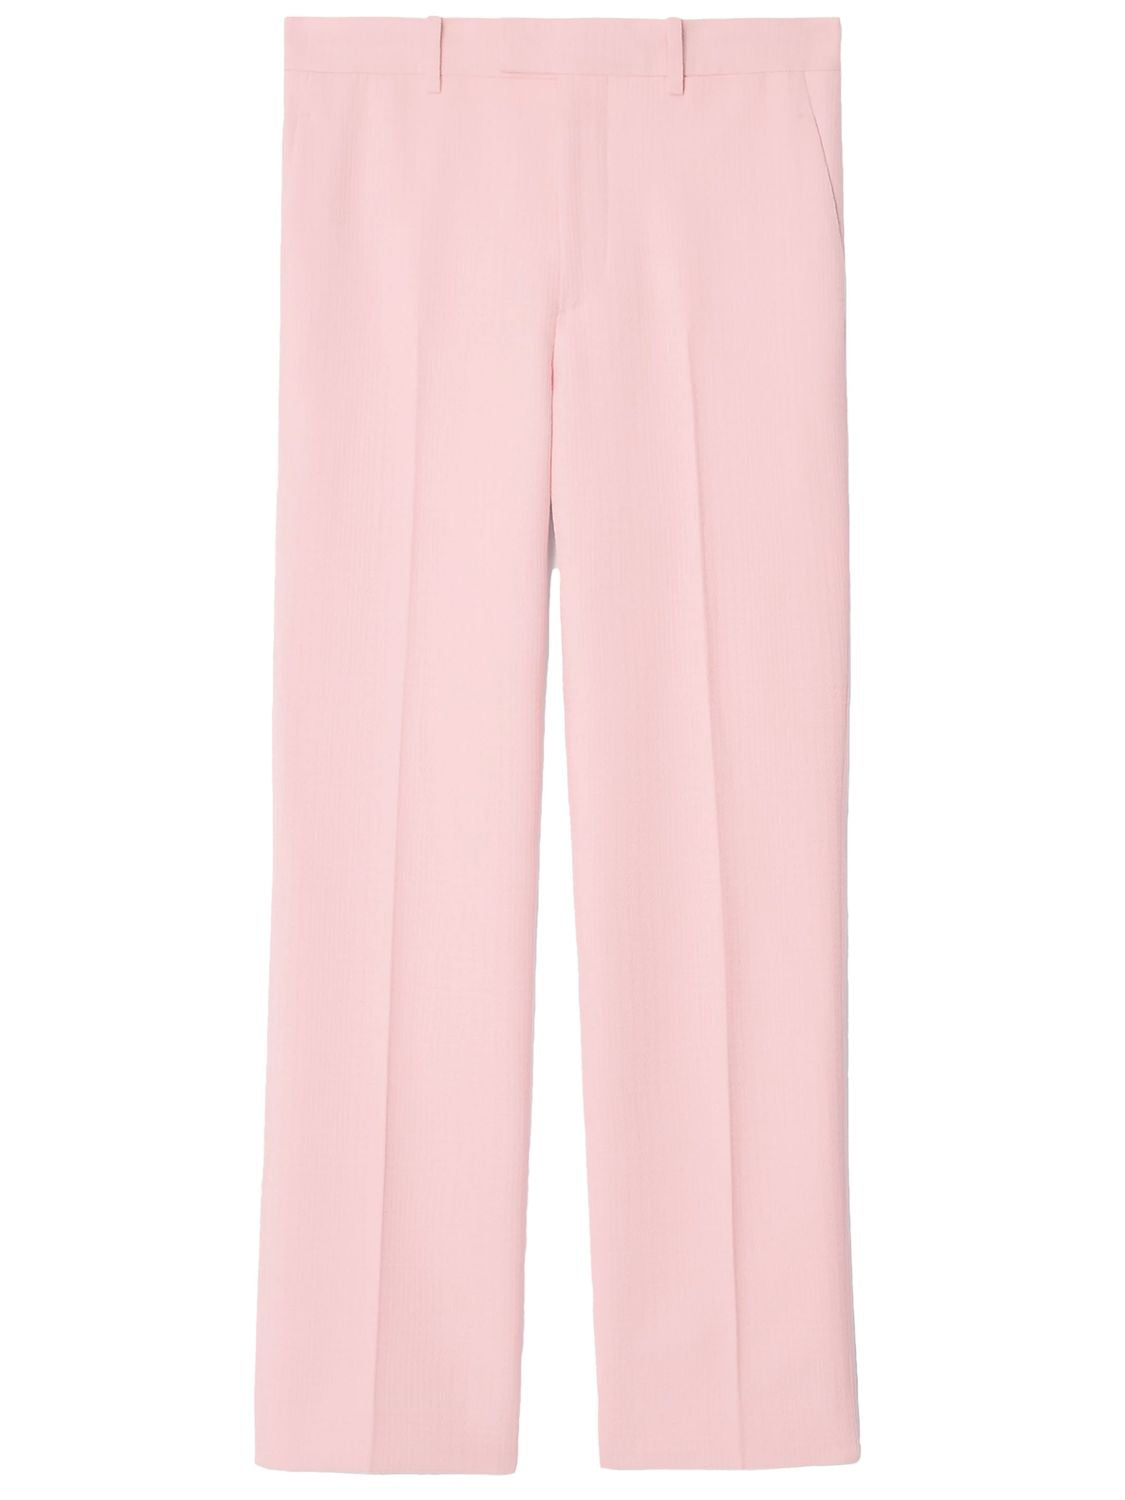 Stylish Tailored Trousers in Vibrant Pink - Regular Fit - UK Sizes